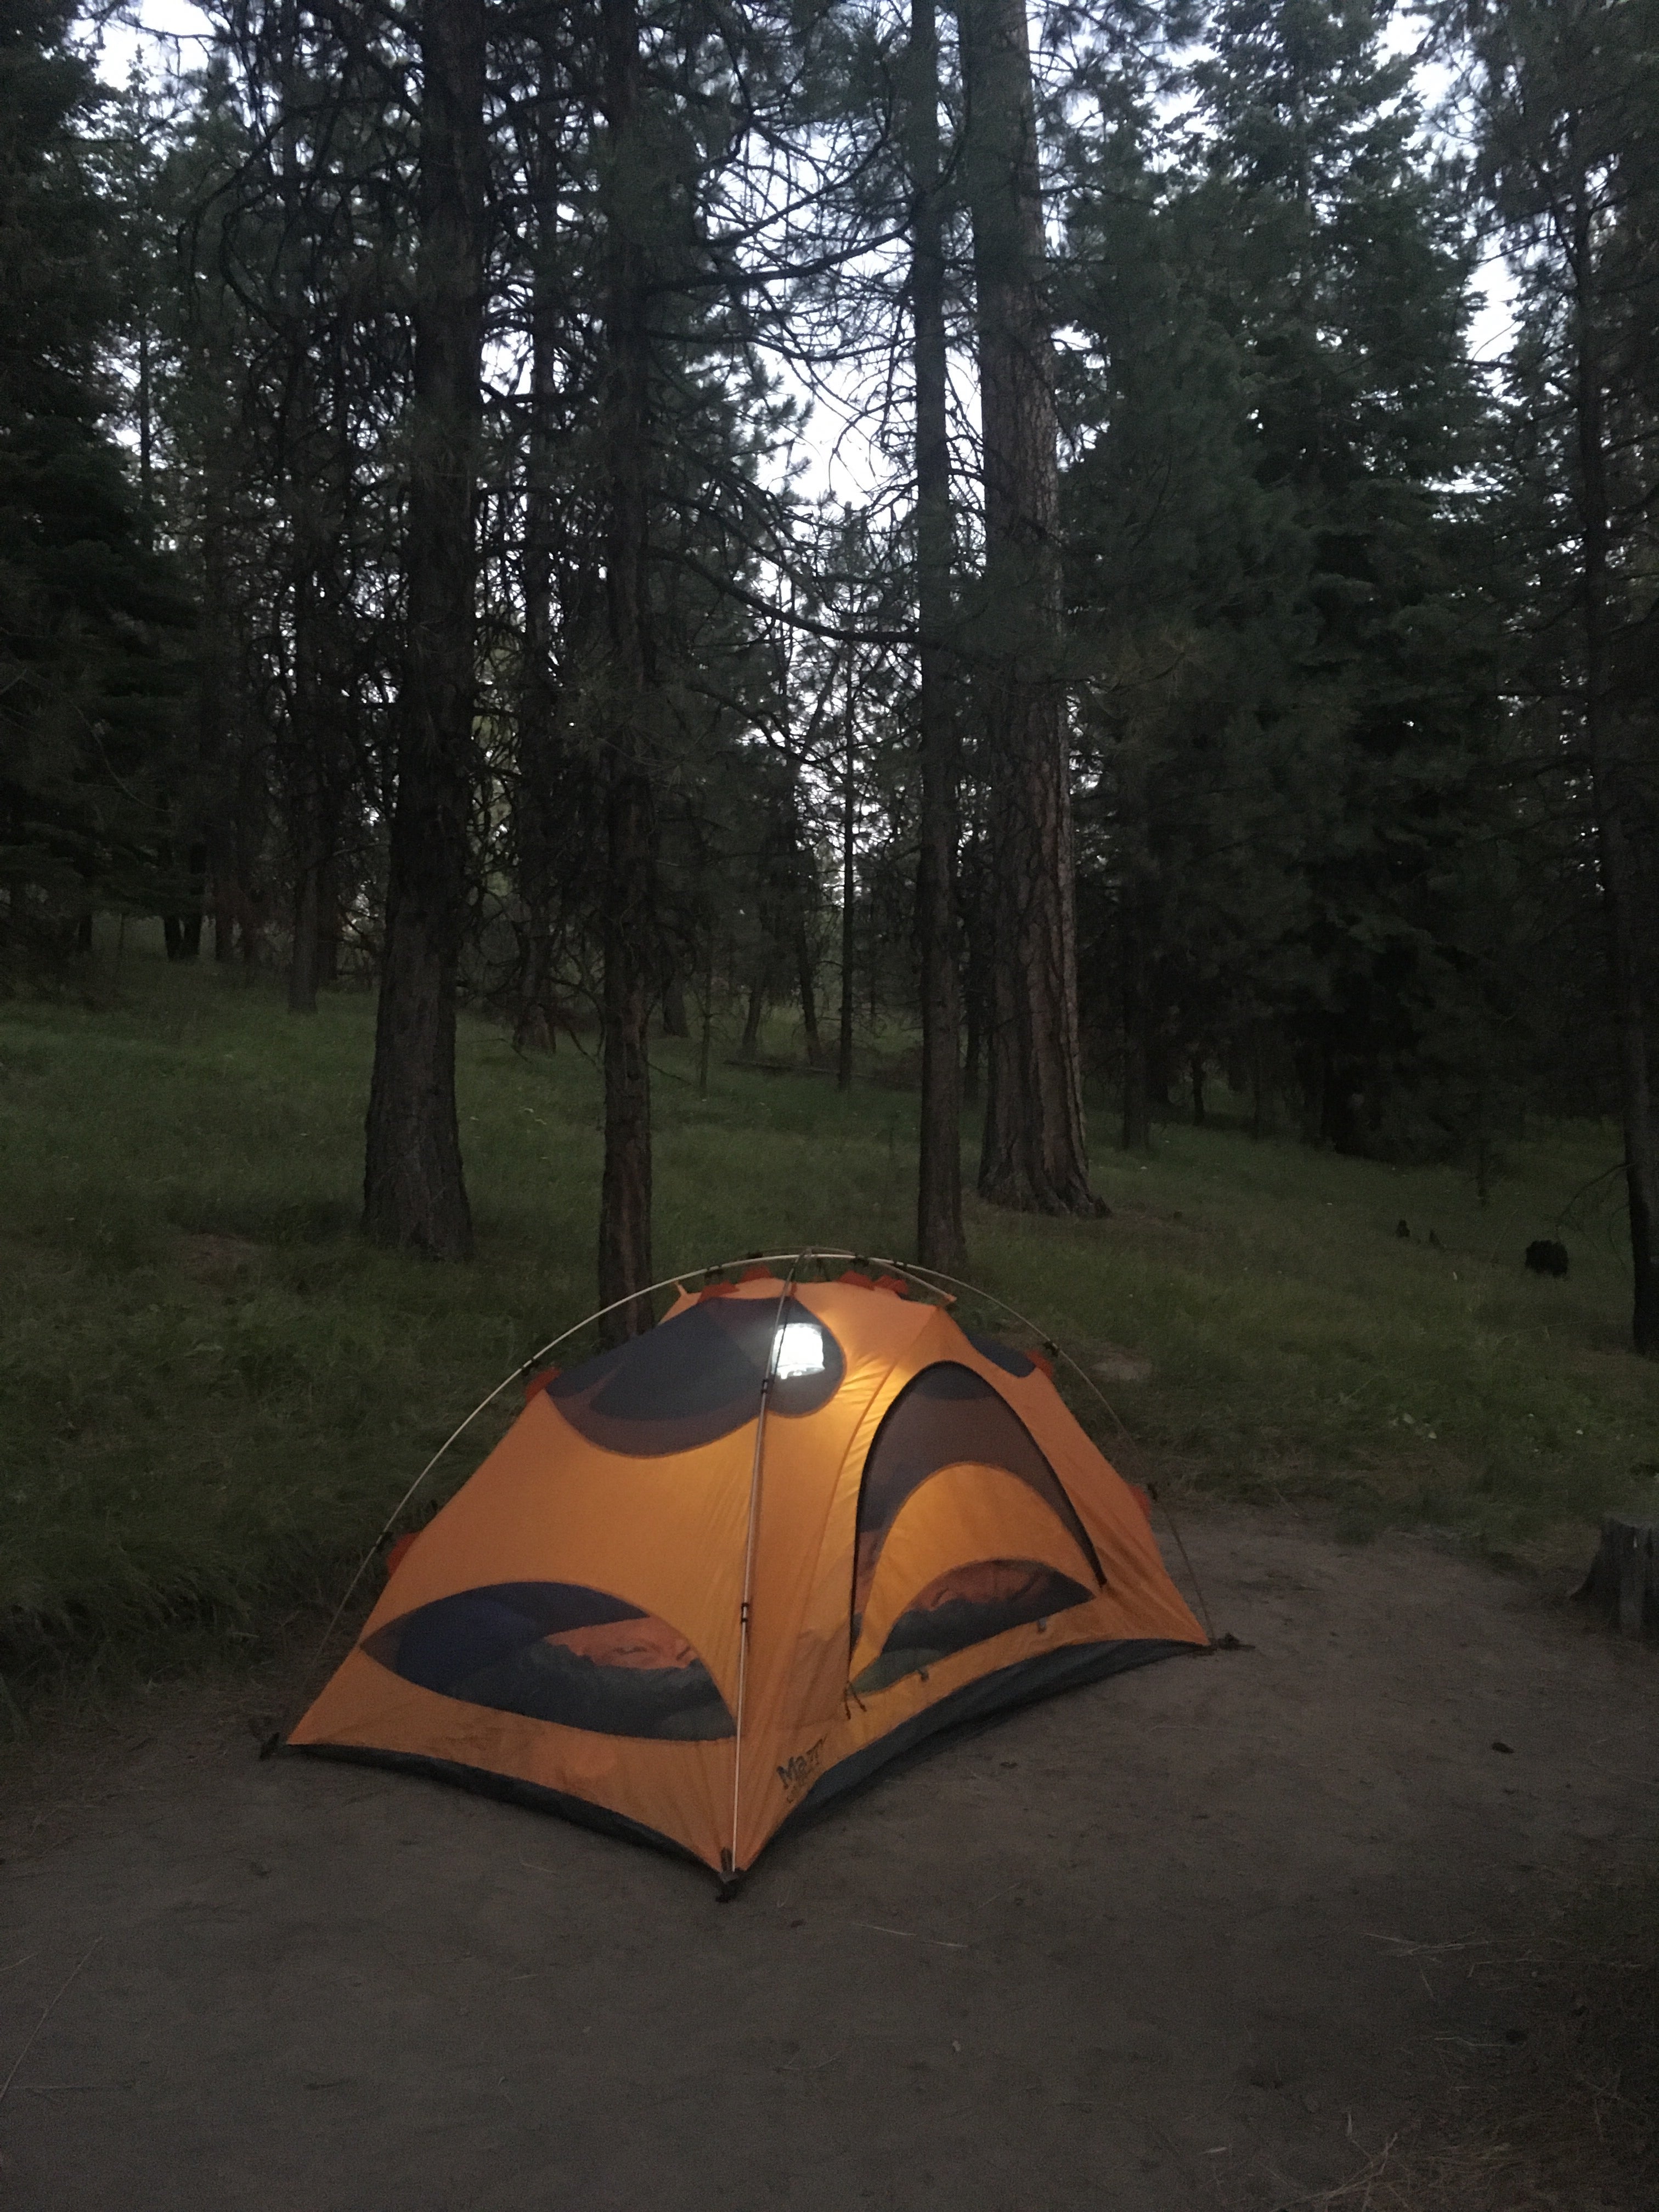 Camper submitted image from Ochoco Forest Camp - 2